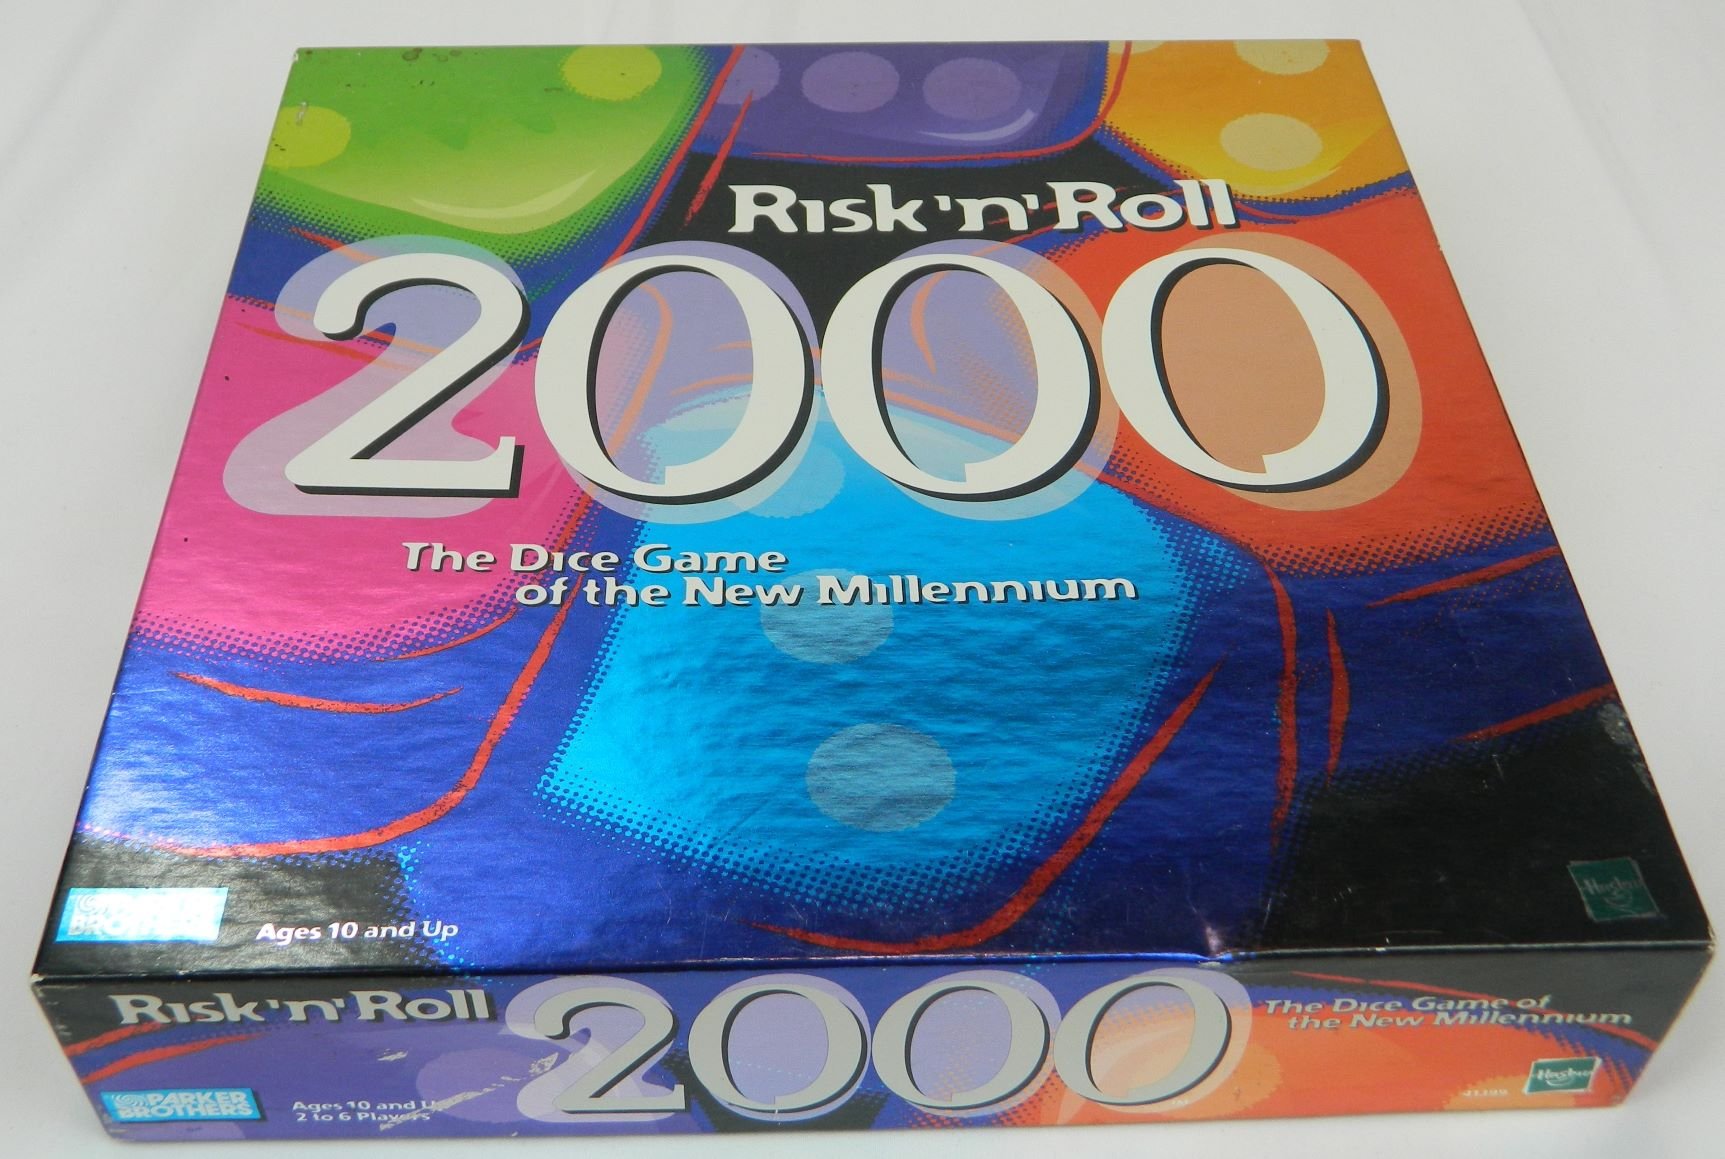 Risk ‘n’ Roll 2000 Dice Game Review and Rules